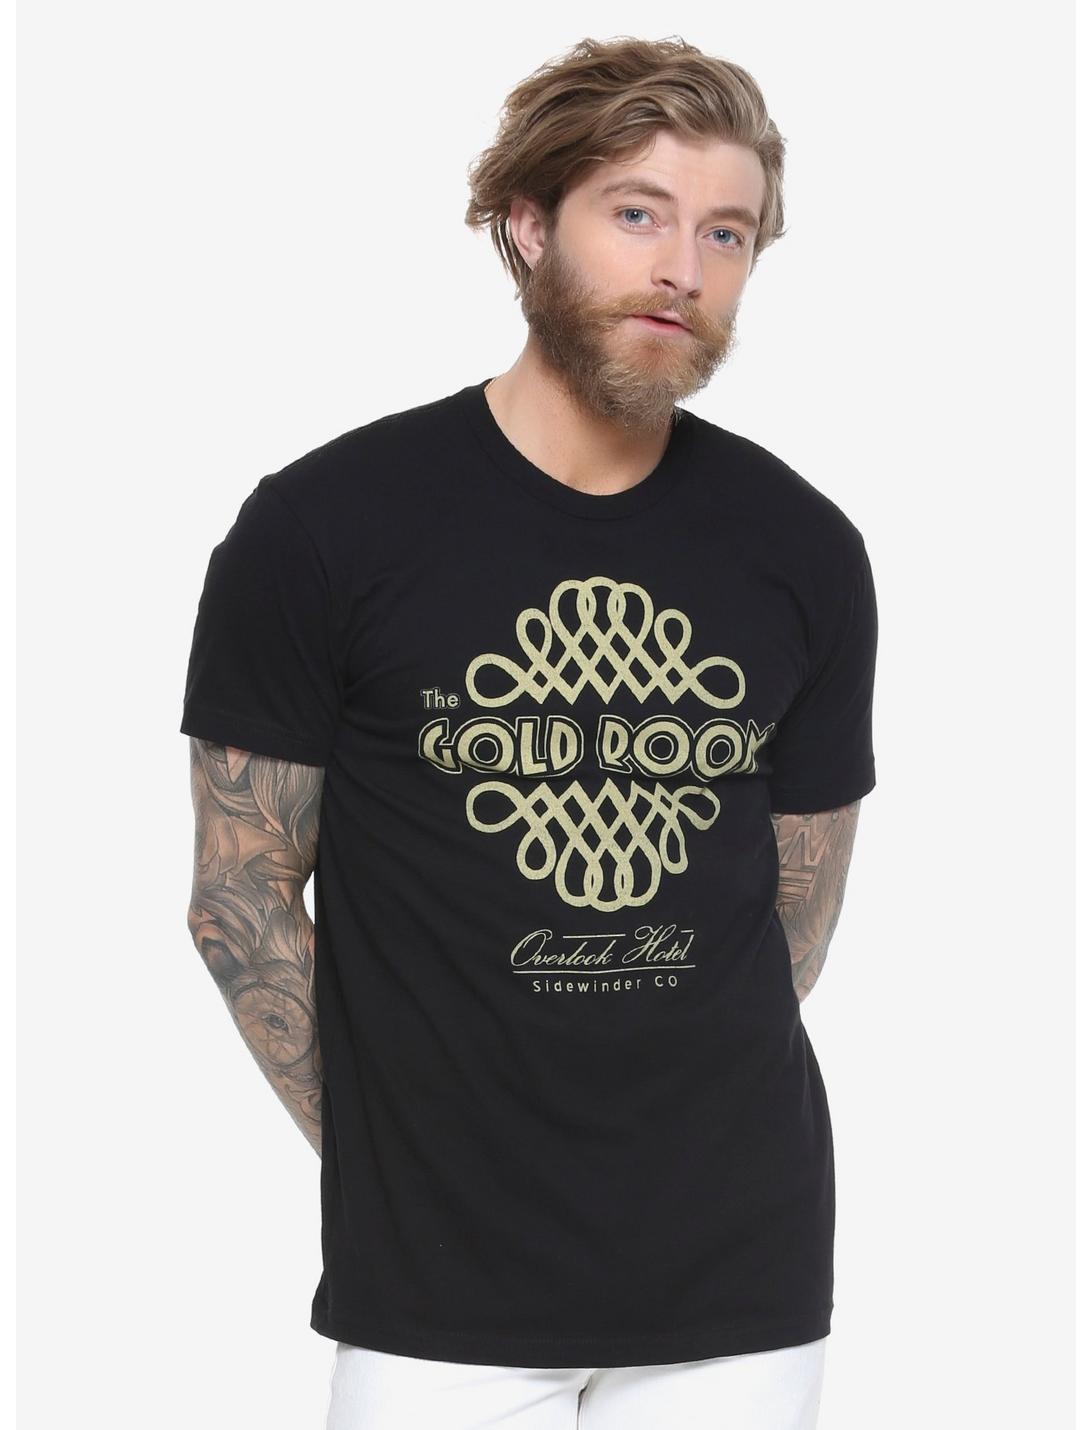 The Shining Gold Room T-Shirt - BoxLunch Exclusive, BLACK, hi-res